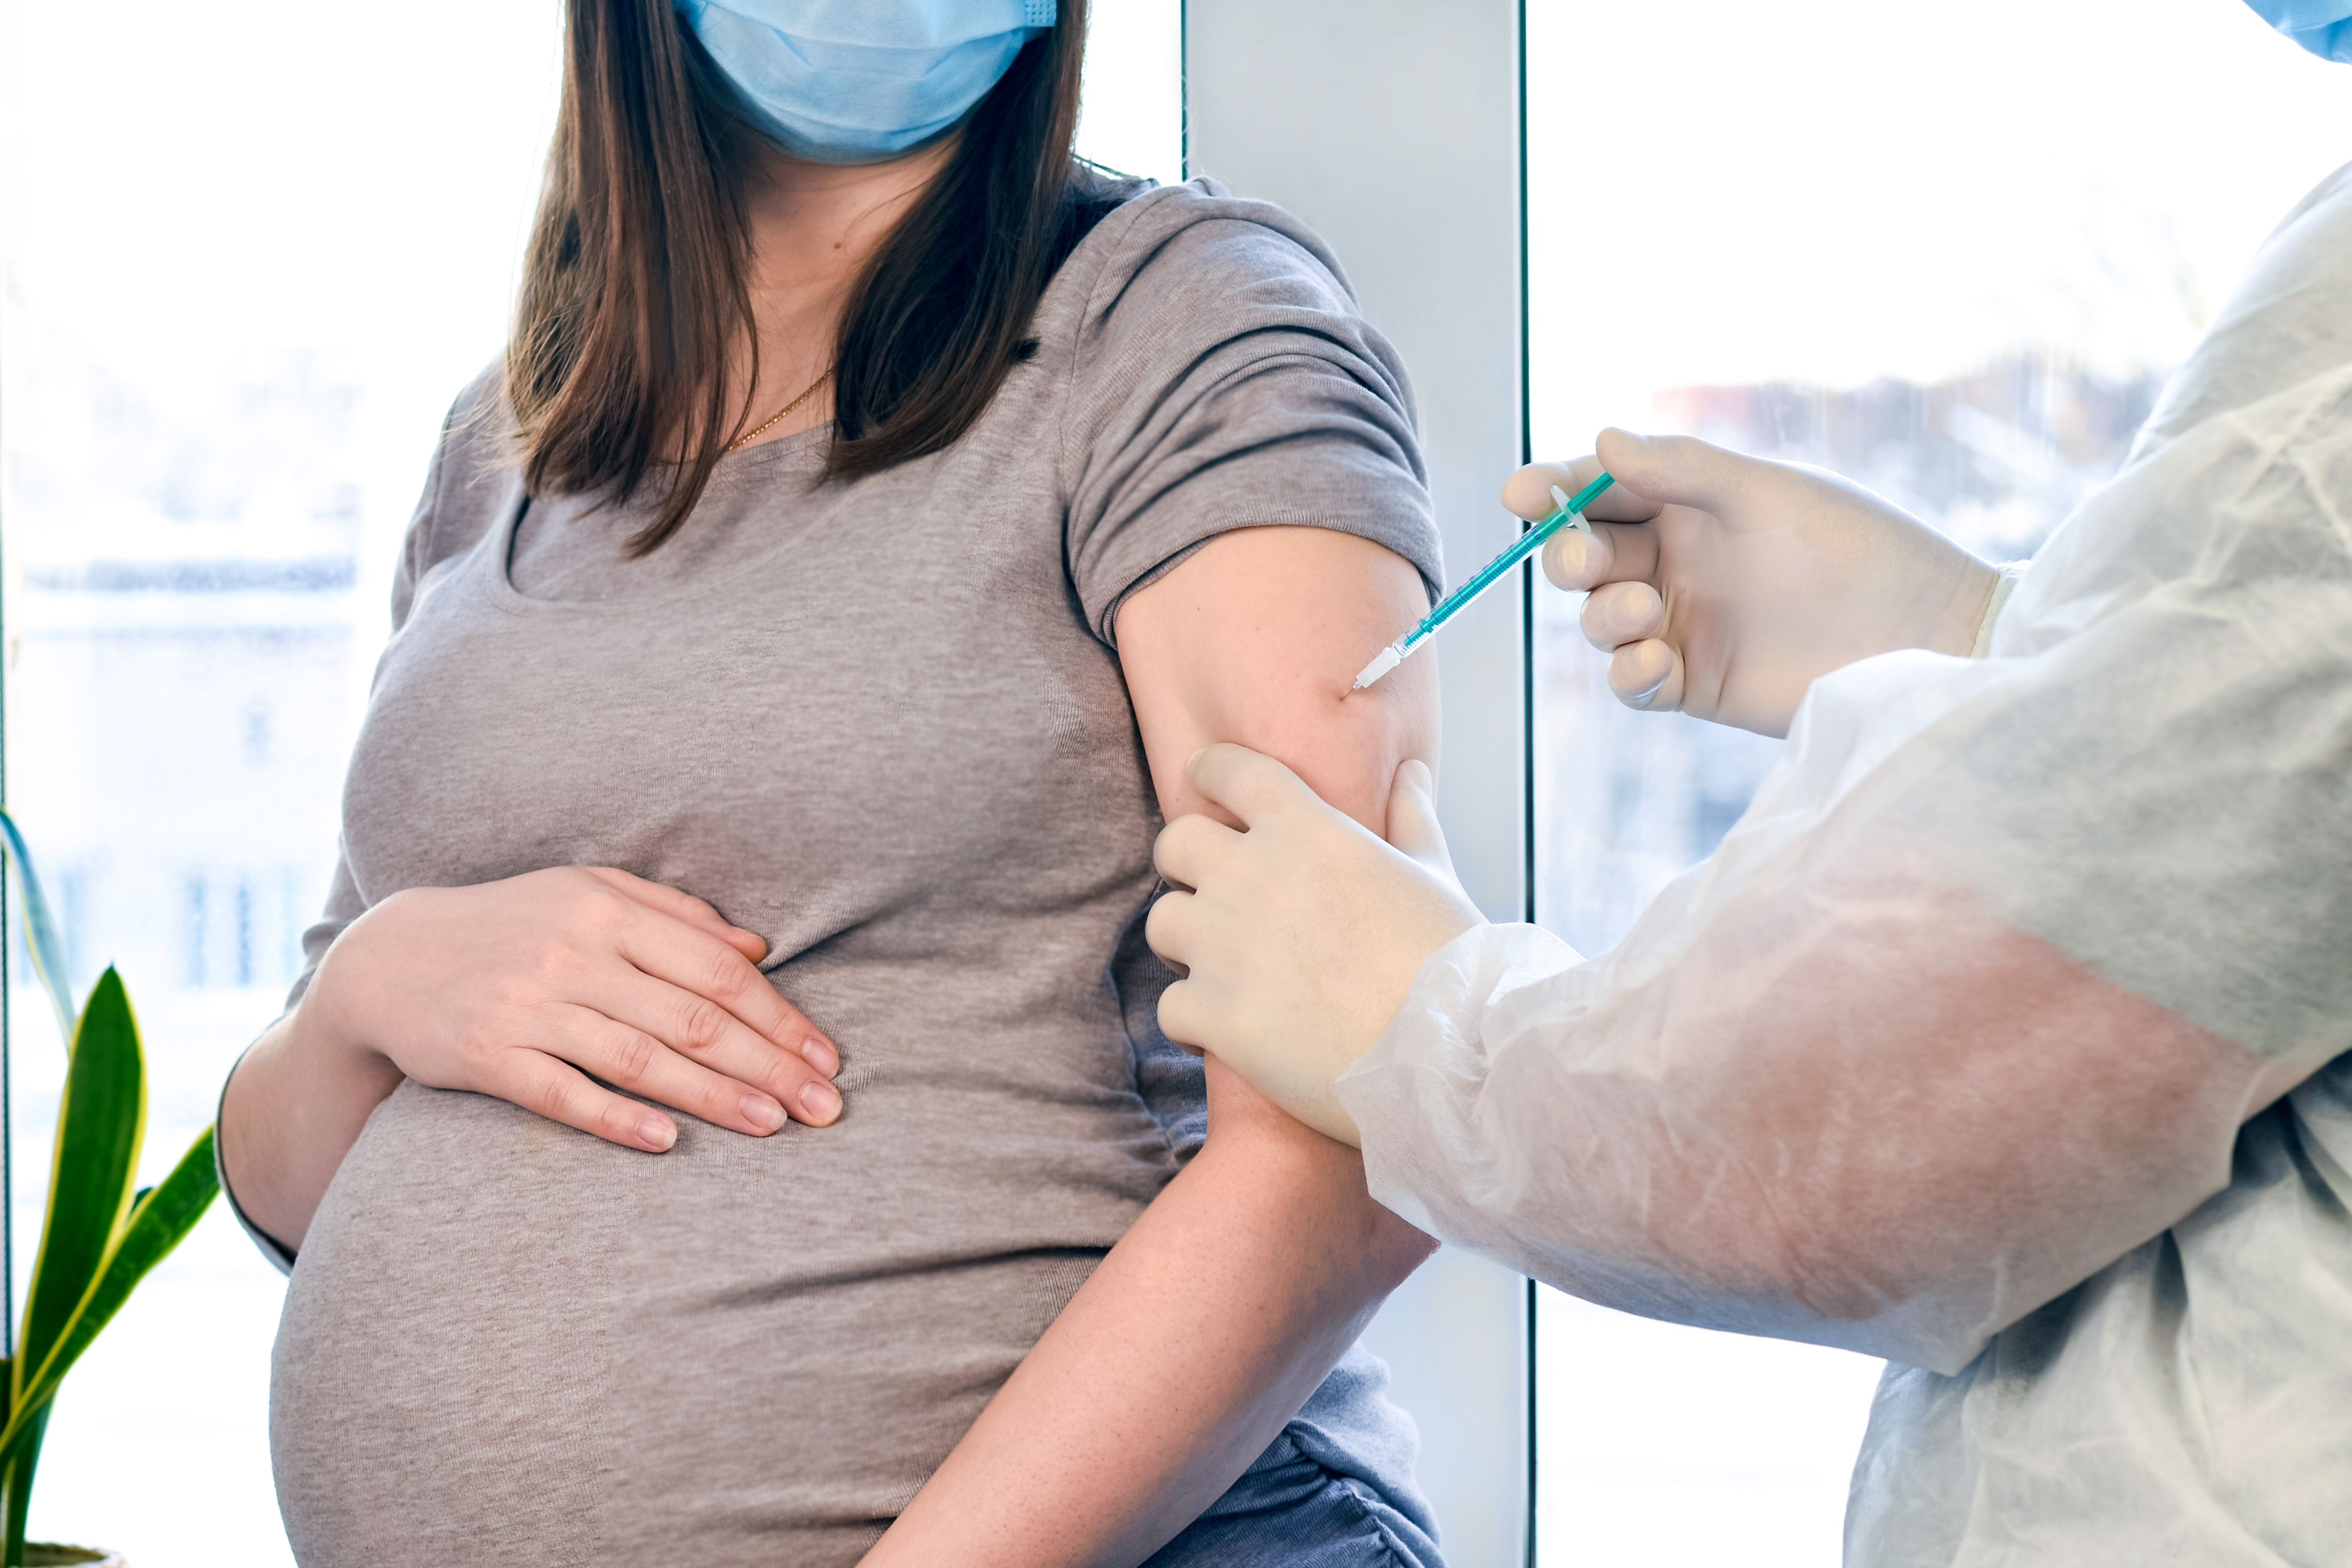 The higher the gestational age when pregnant women received a COVID-19 vaccine, the higher the serological titers at birth.